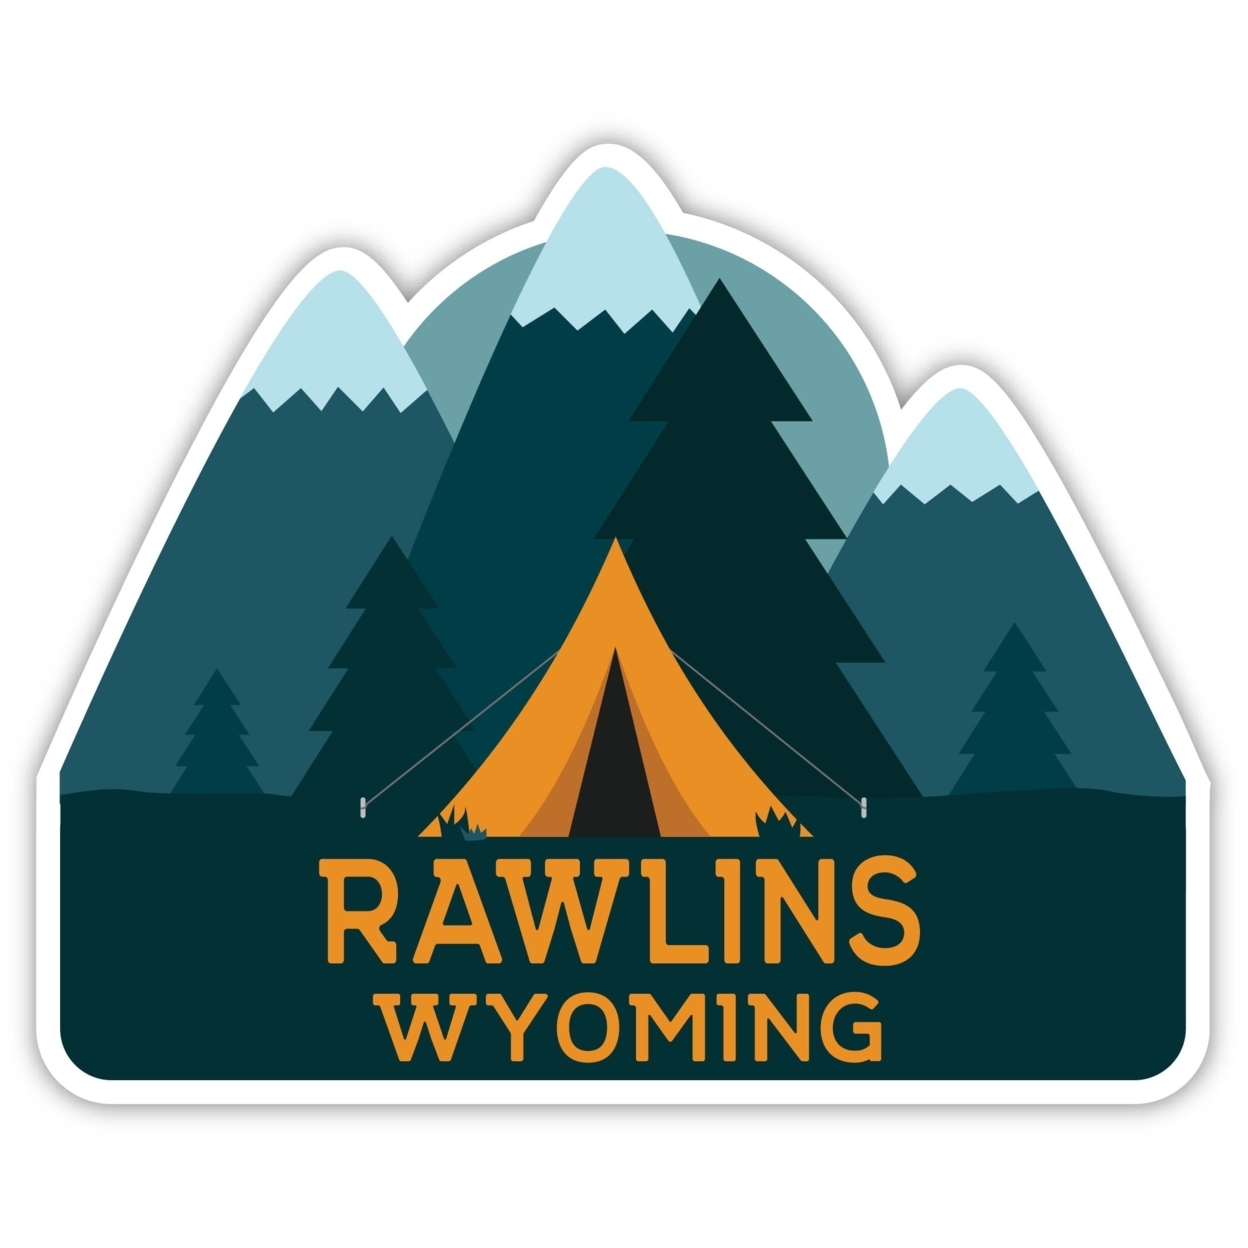 Rawlins Wyoming Souvenir Decorative Stickers (Choose Theme And Size) - Single Unit, 2-Inch, Tent